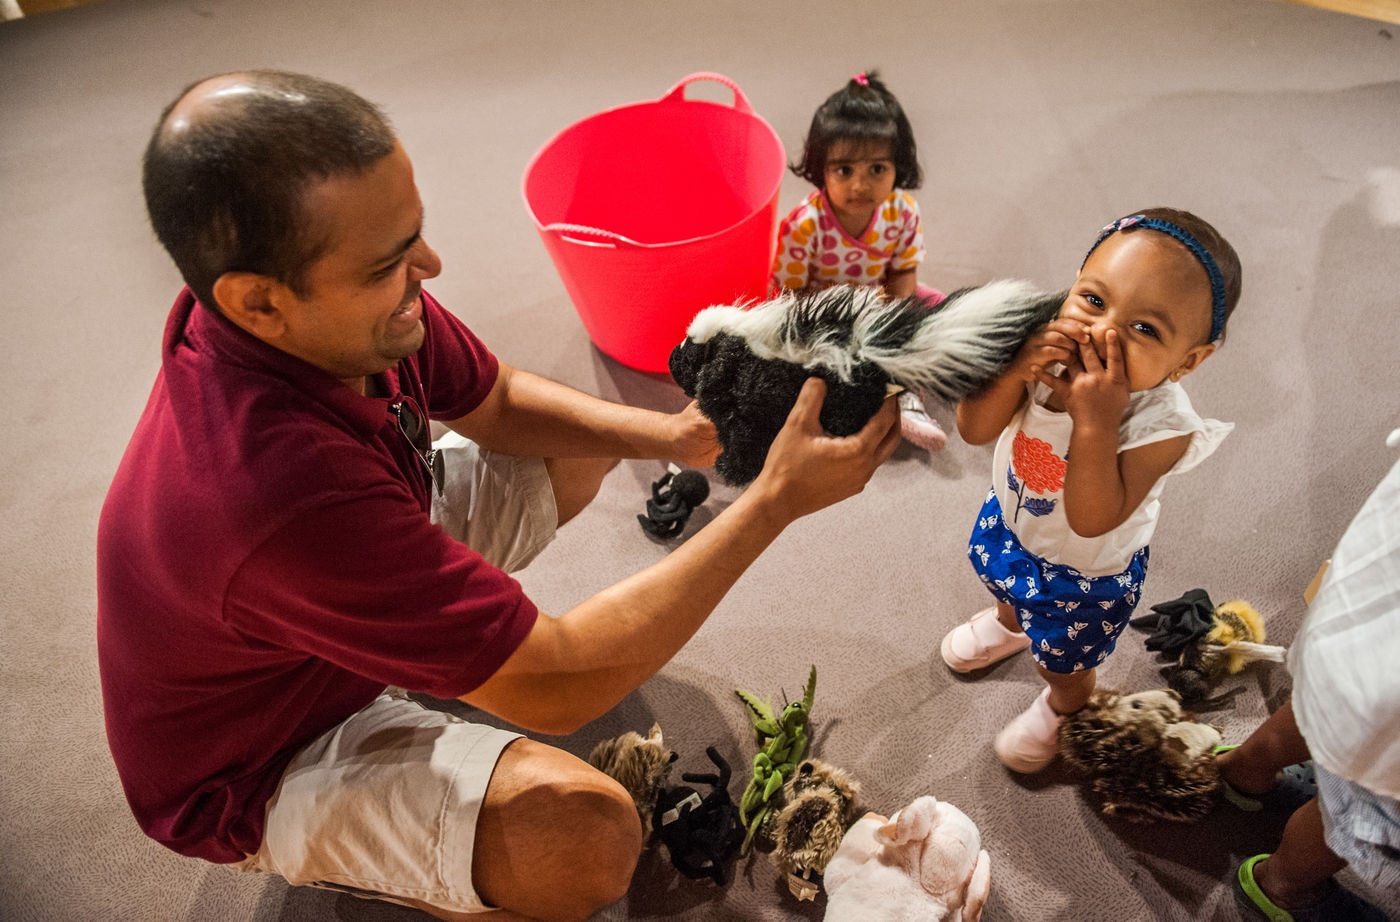 Eek, a skunk! Children can meet new friends as they explore animal puppets.